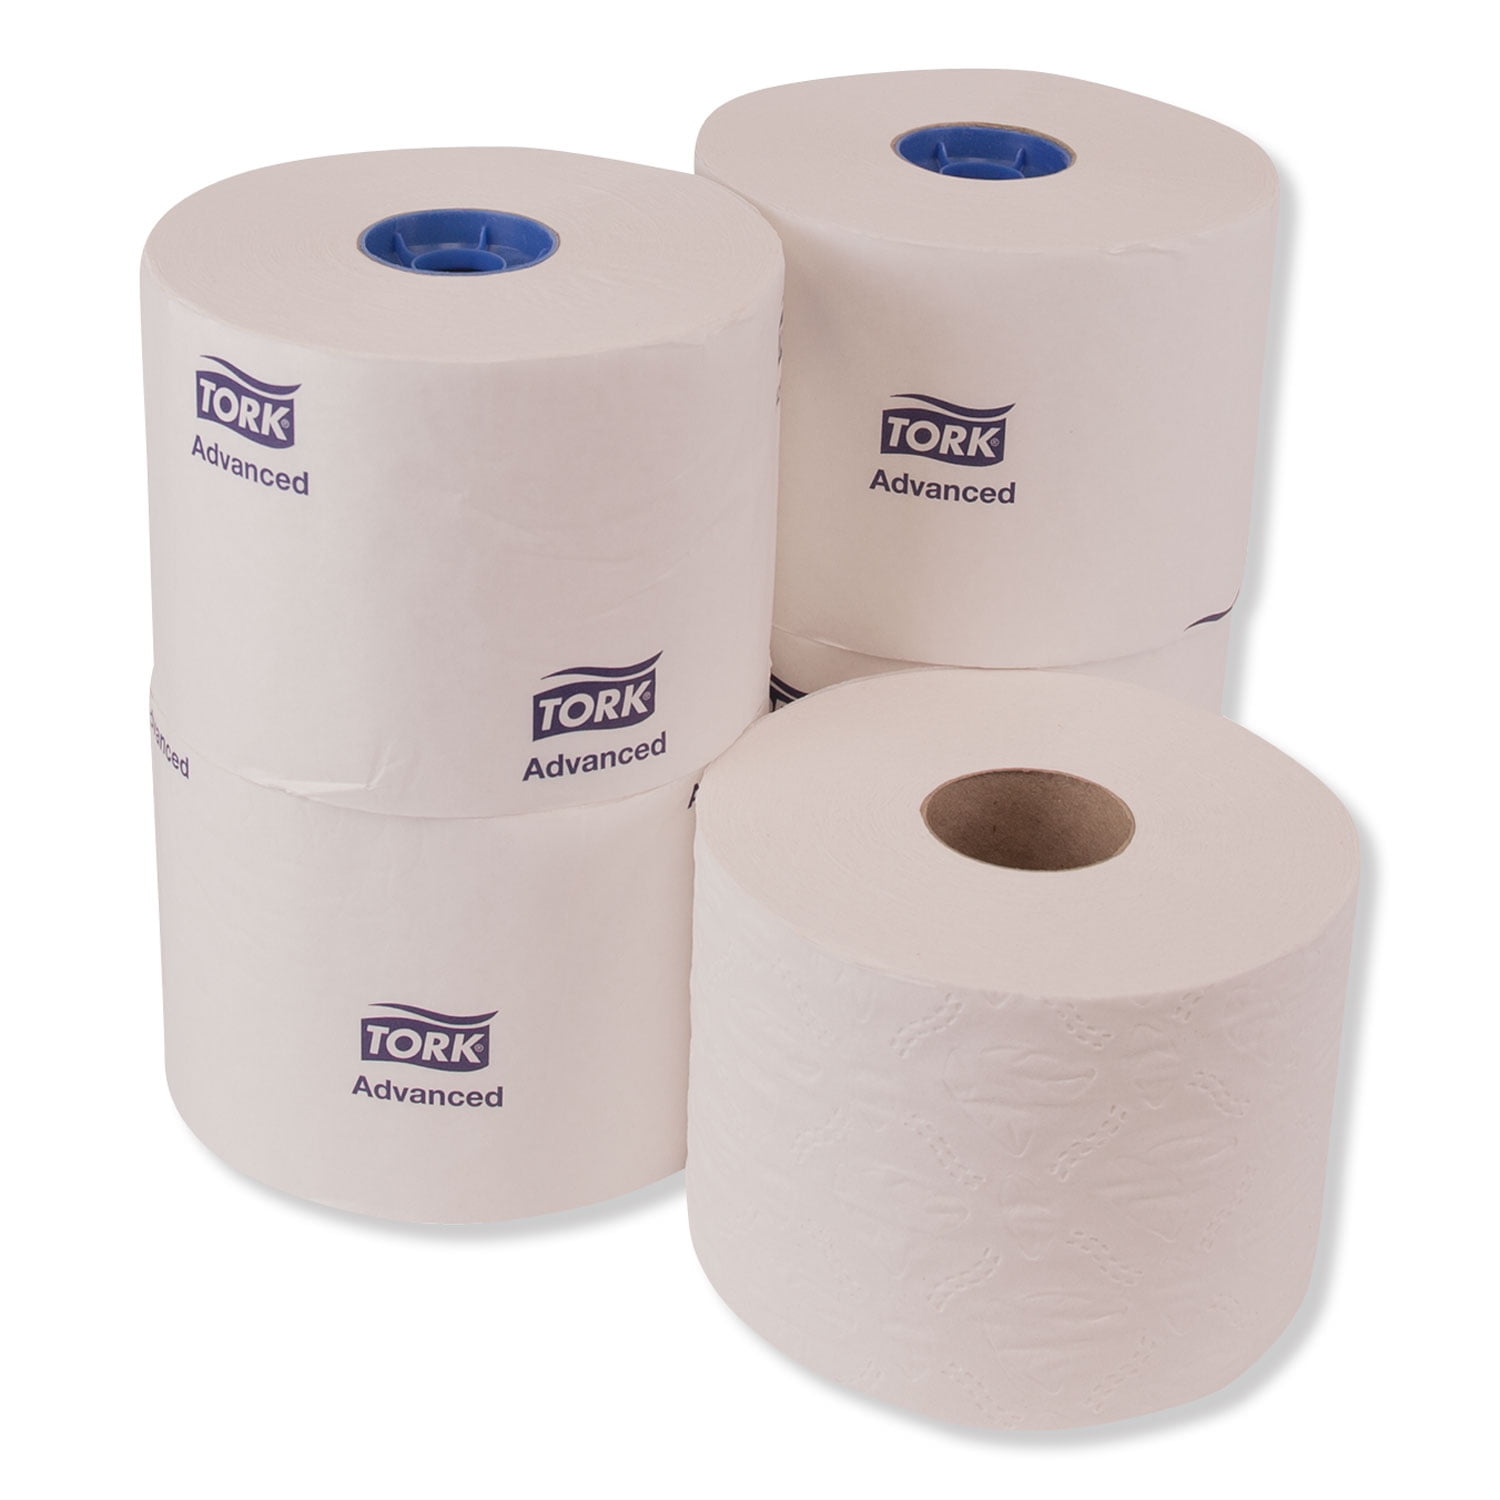 Tork Advanced High Capacity Toilet Paper, Septic Safe, 2-Ply, White, 1,000 Sheets/Roll, 36/Carton -TRK110292A - 3